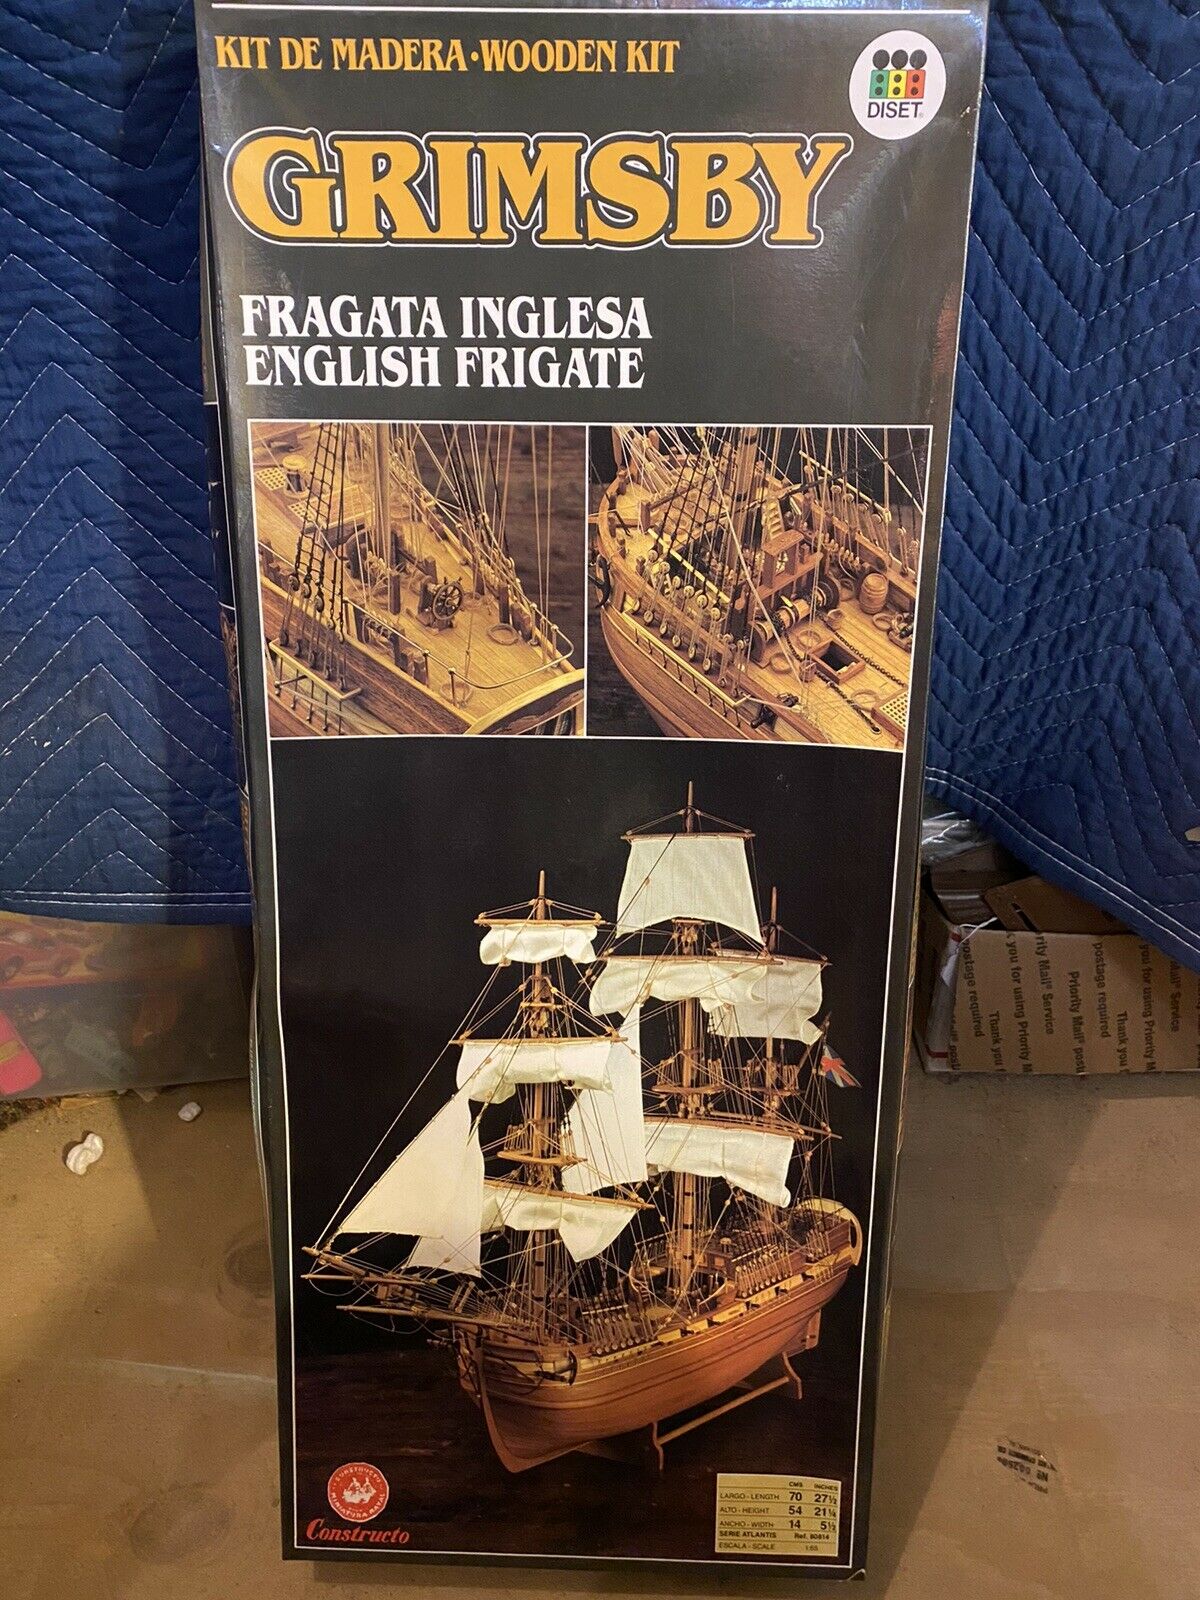 Vintage Constructo Wooden Model Kit GRIMSBY Diset Complete Box Instructions NIB